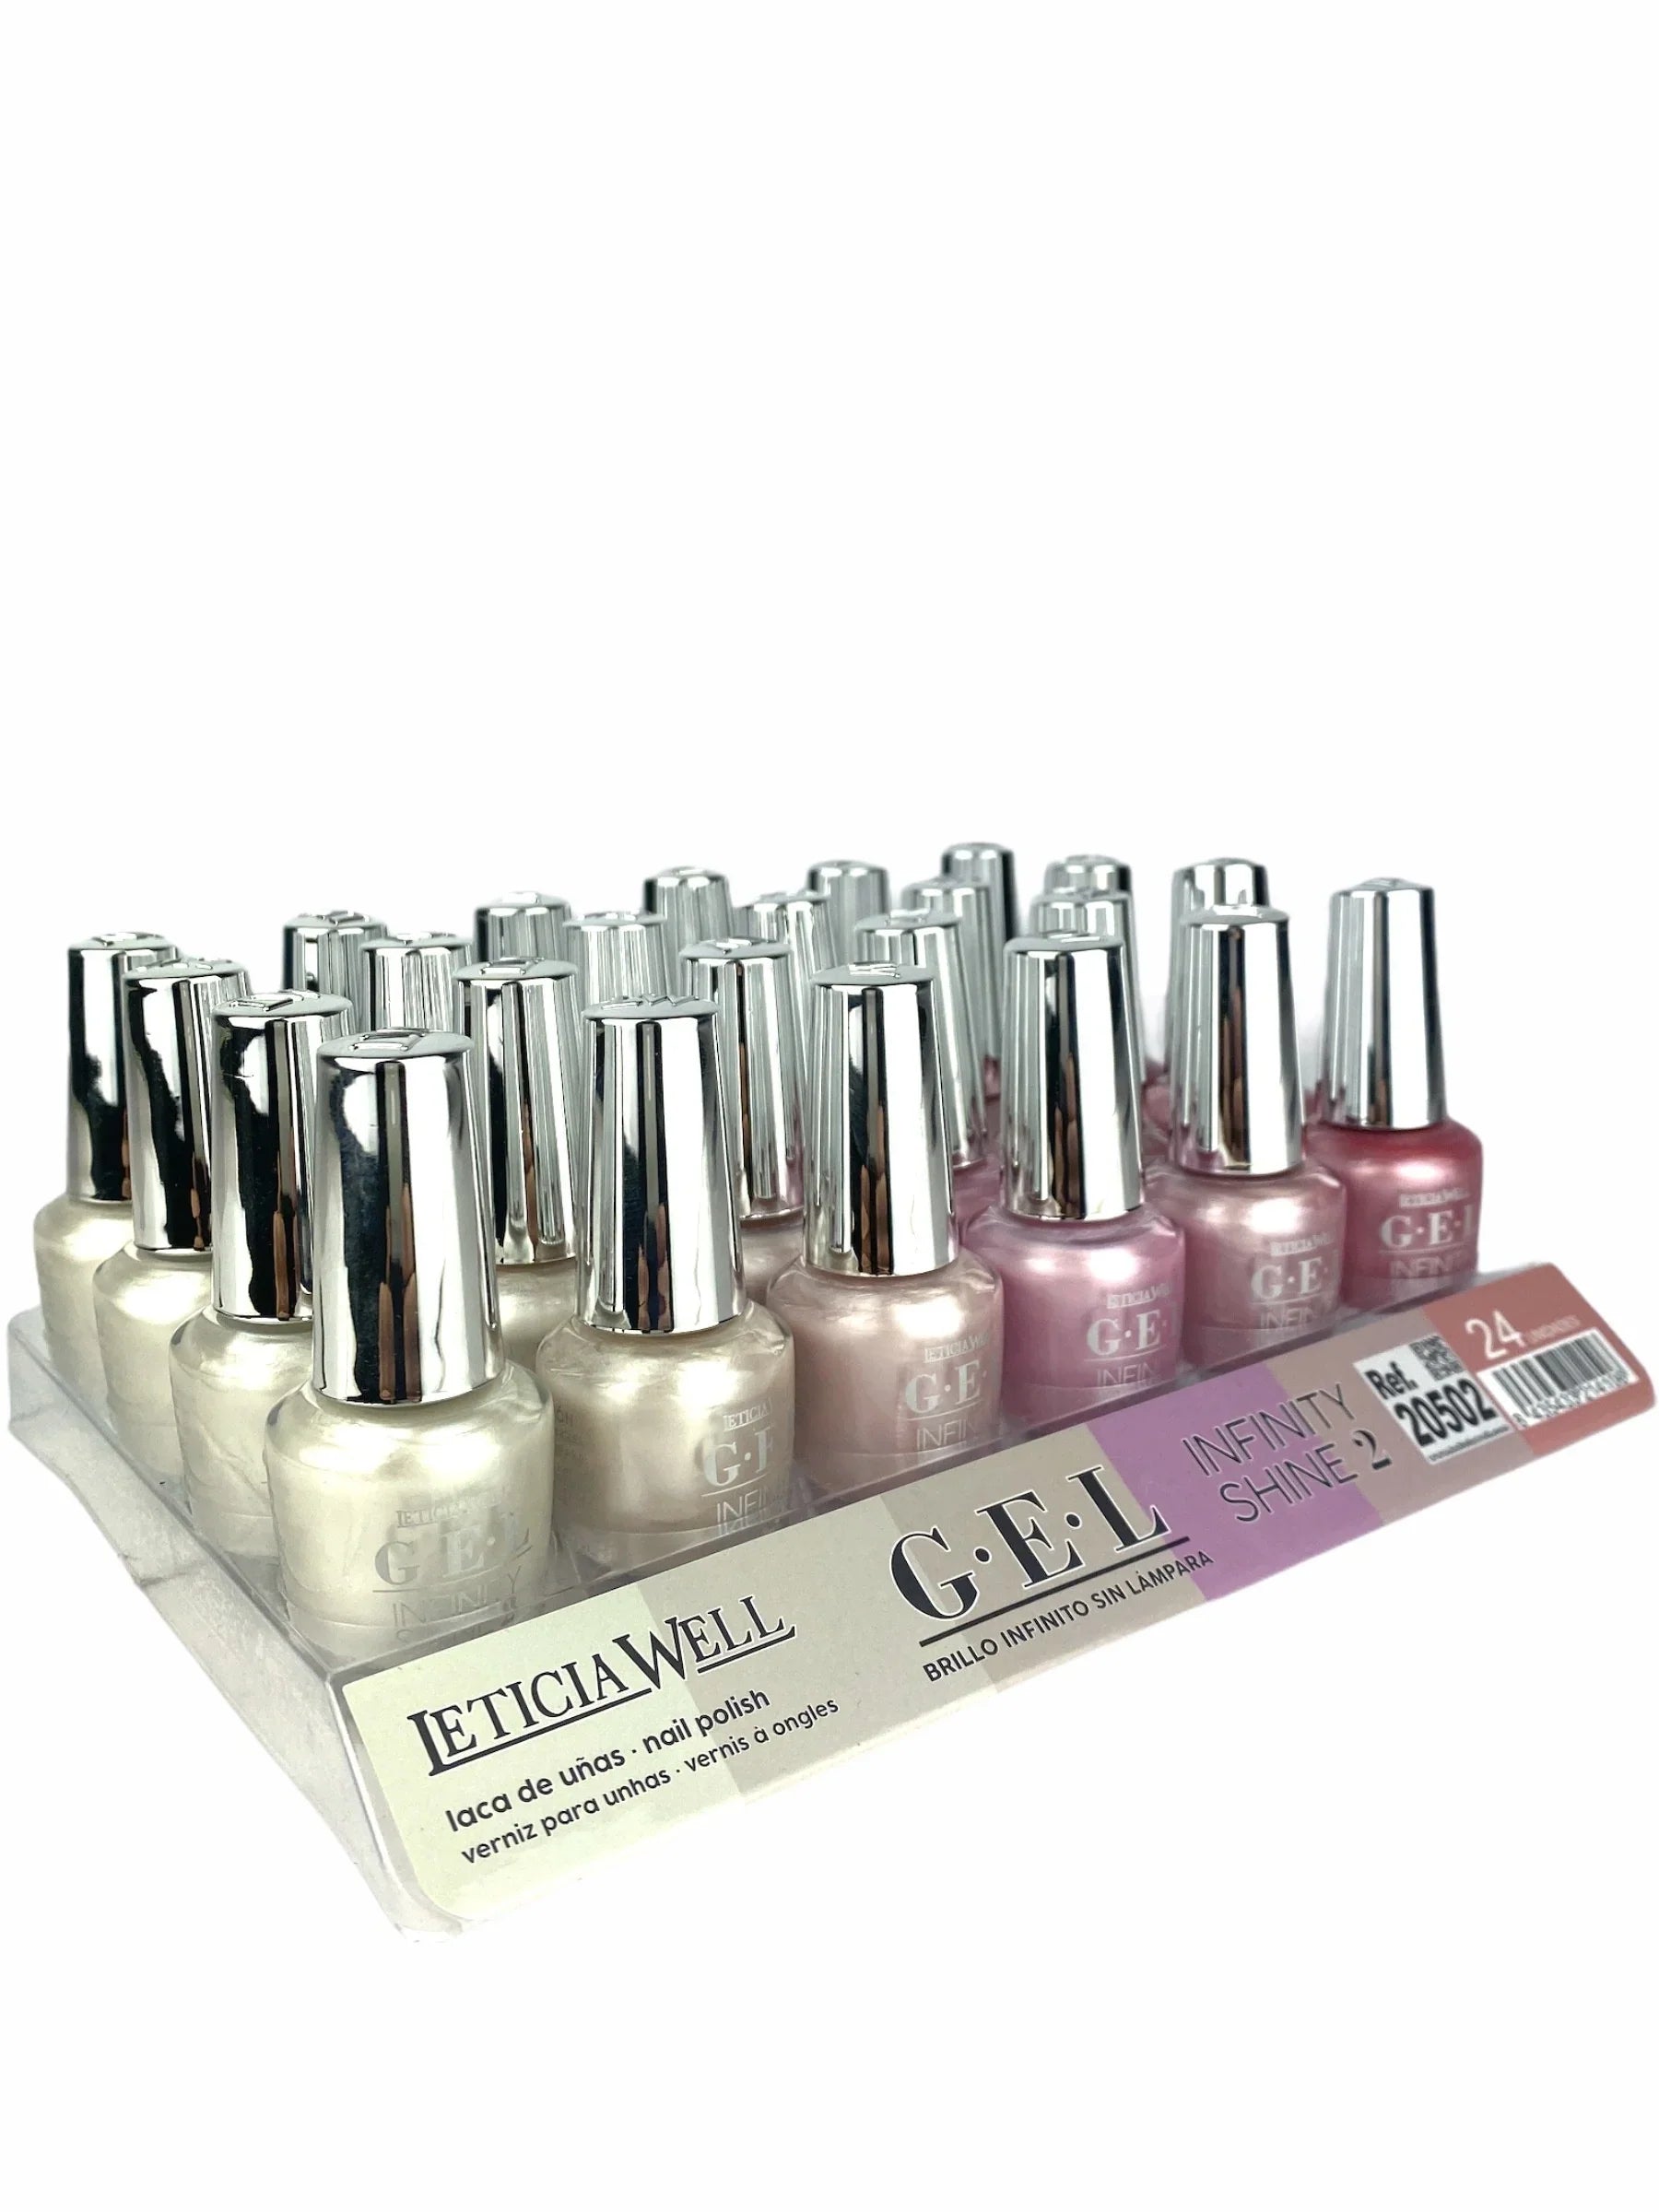 PACK DE 24 VERNIS A ONGLES G·E·L "Infinity Shine2" - LETICIA WELL